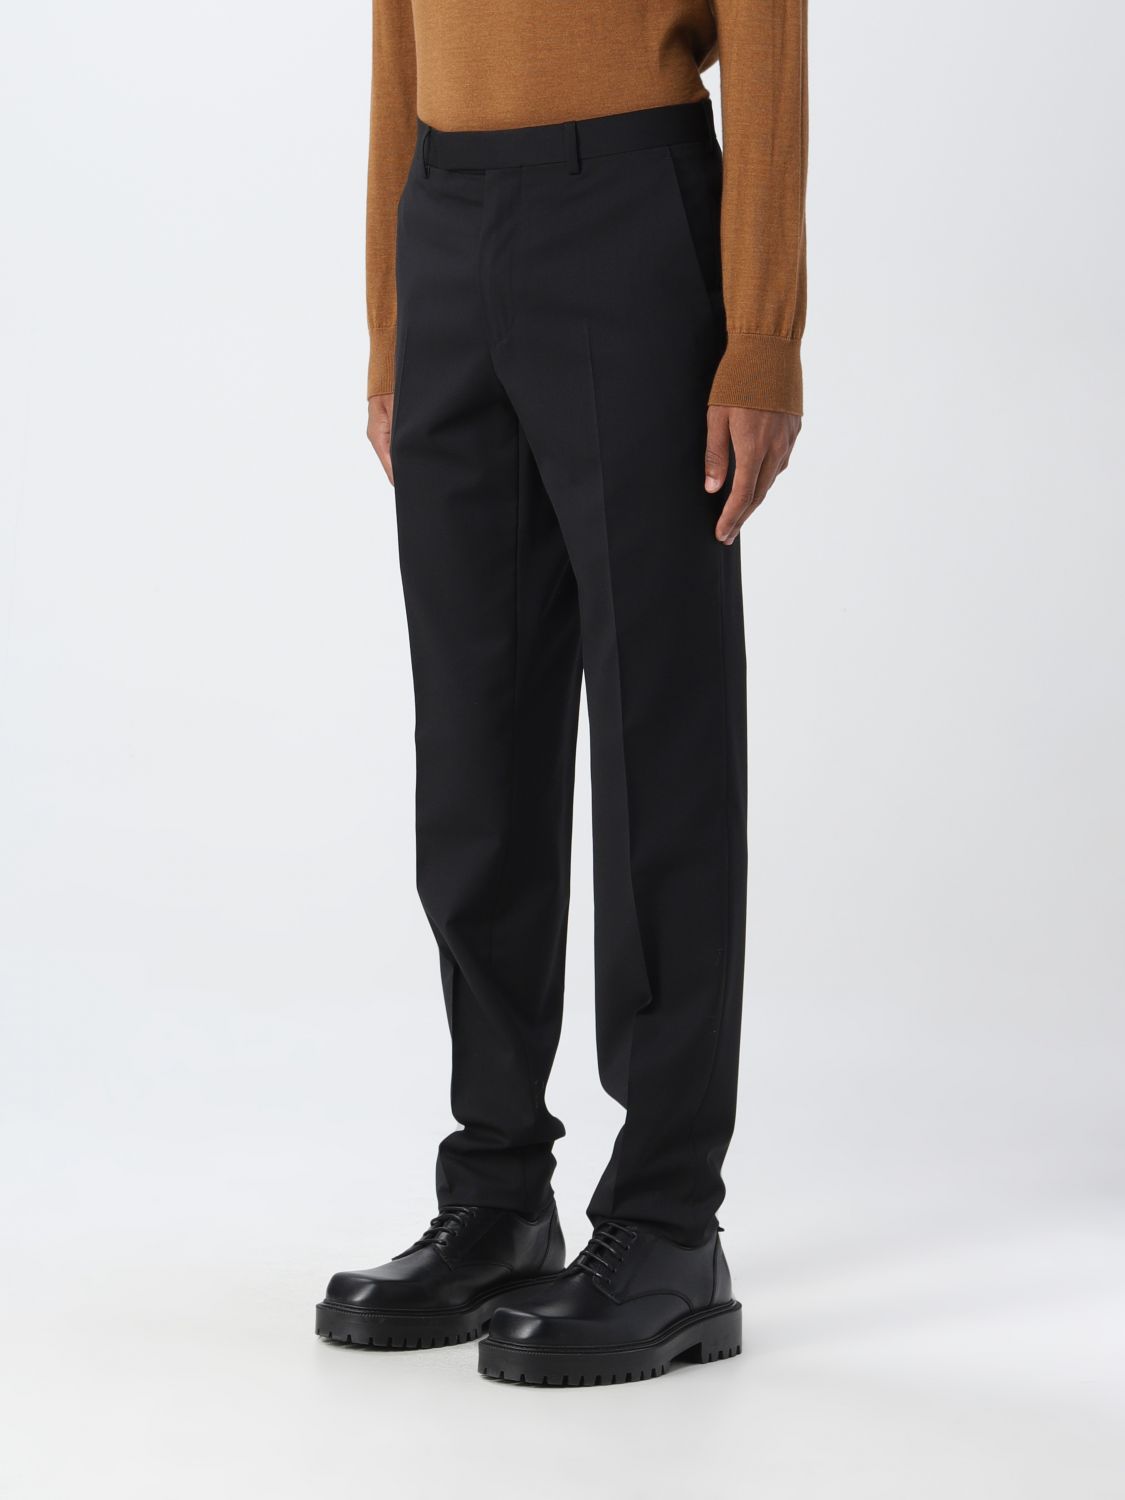 Trousers Zegna: Zegna trousers for men black 4